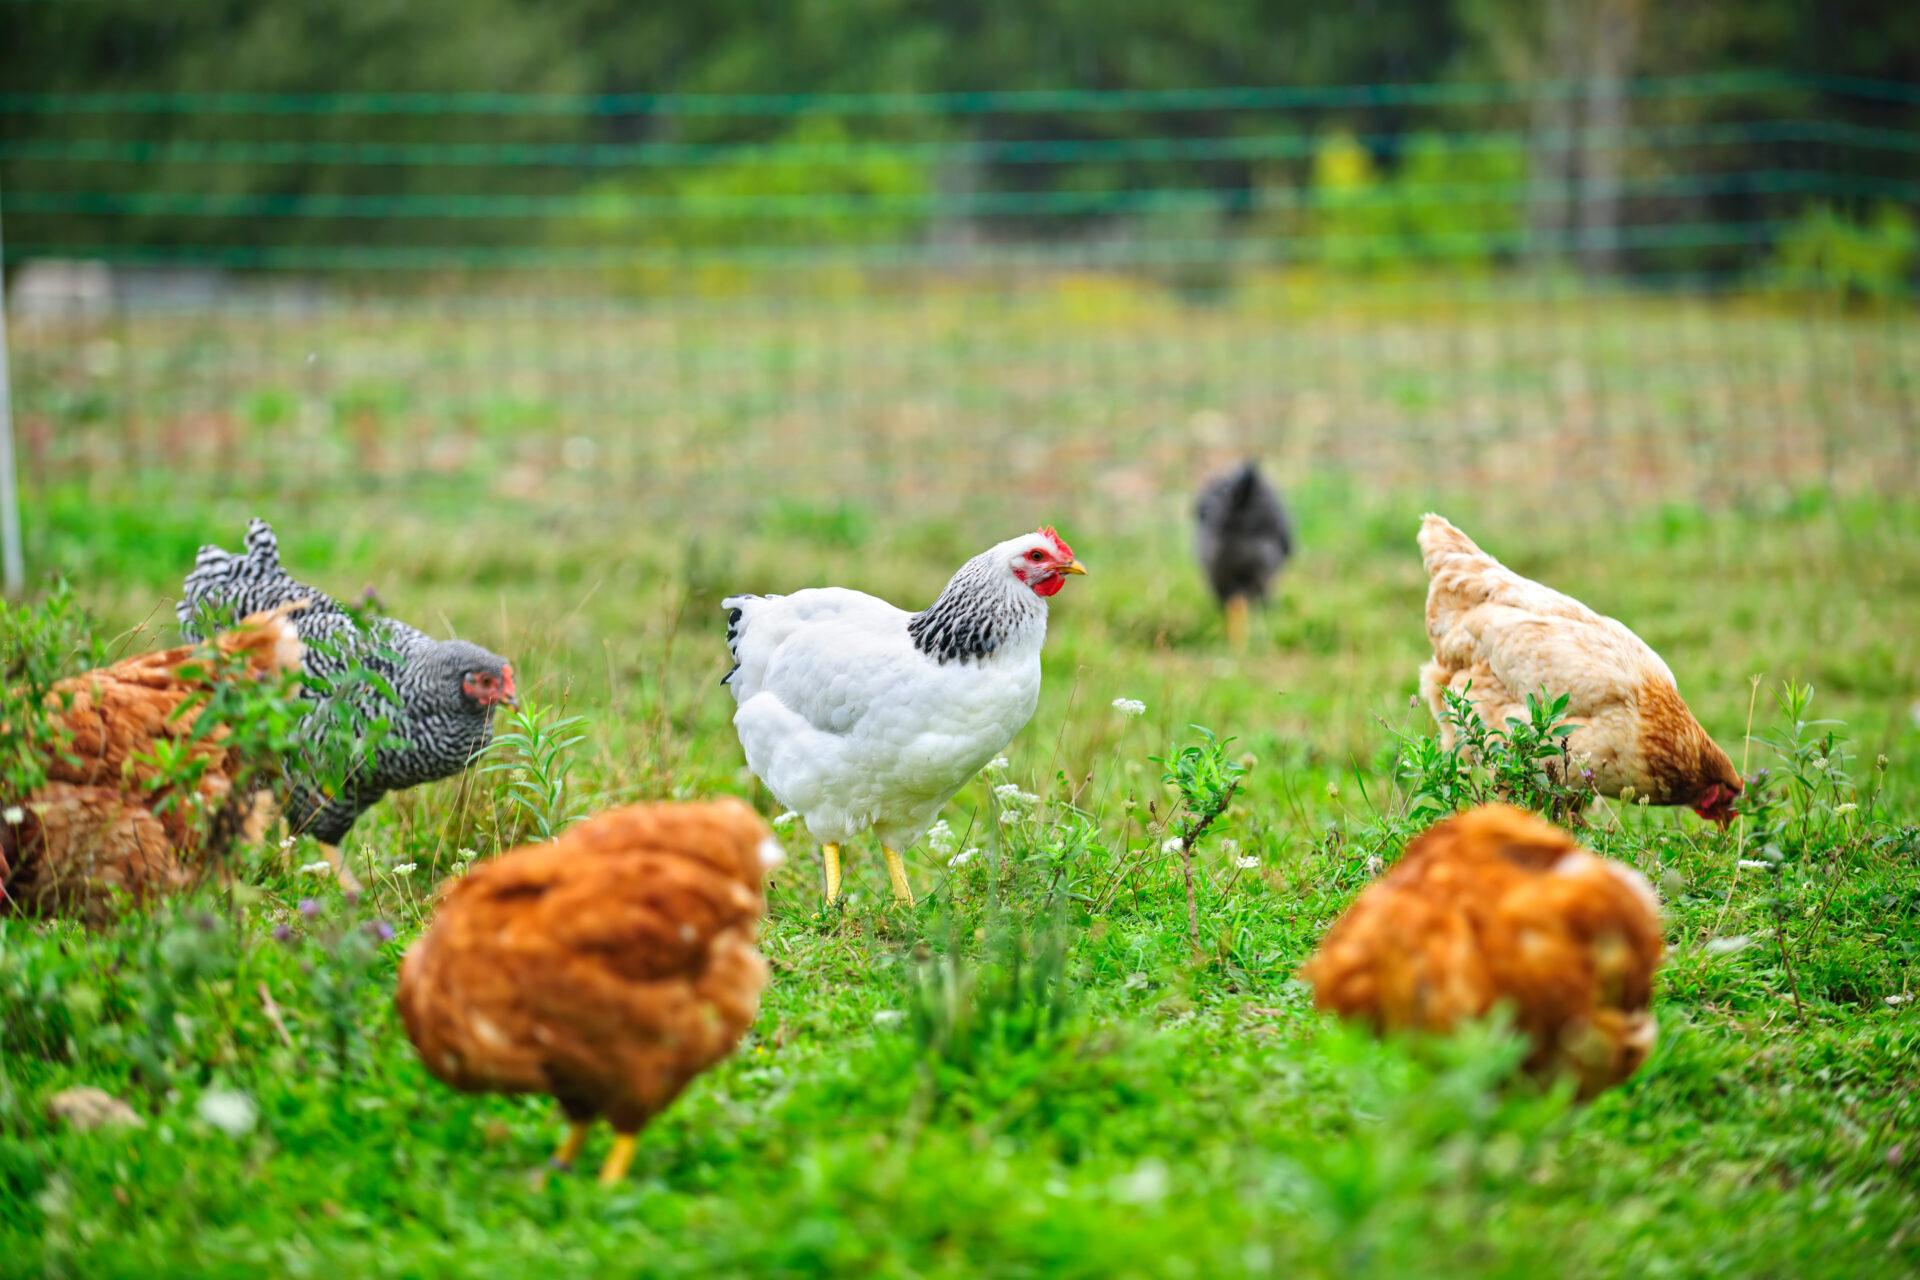 White and brown chickens graze in a field of green grass.